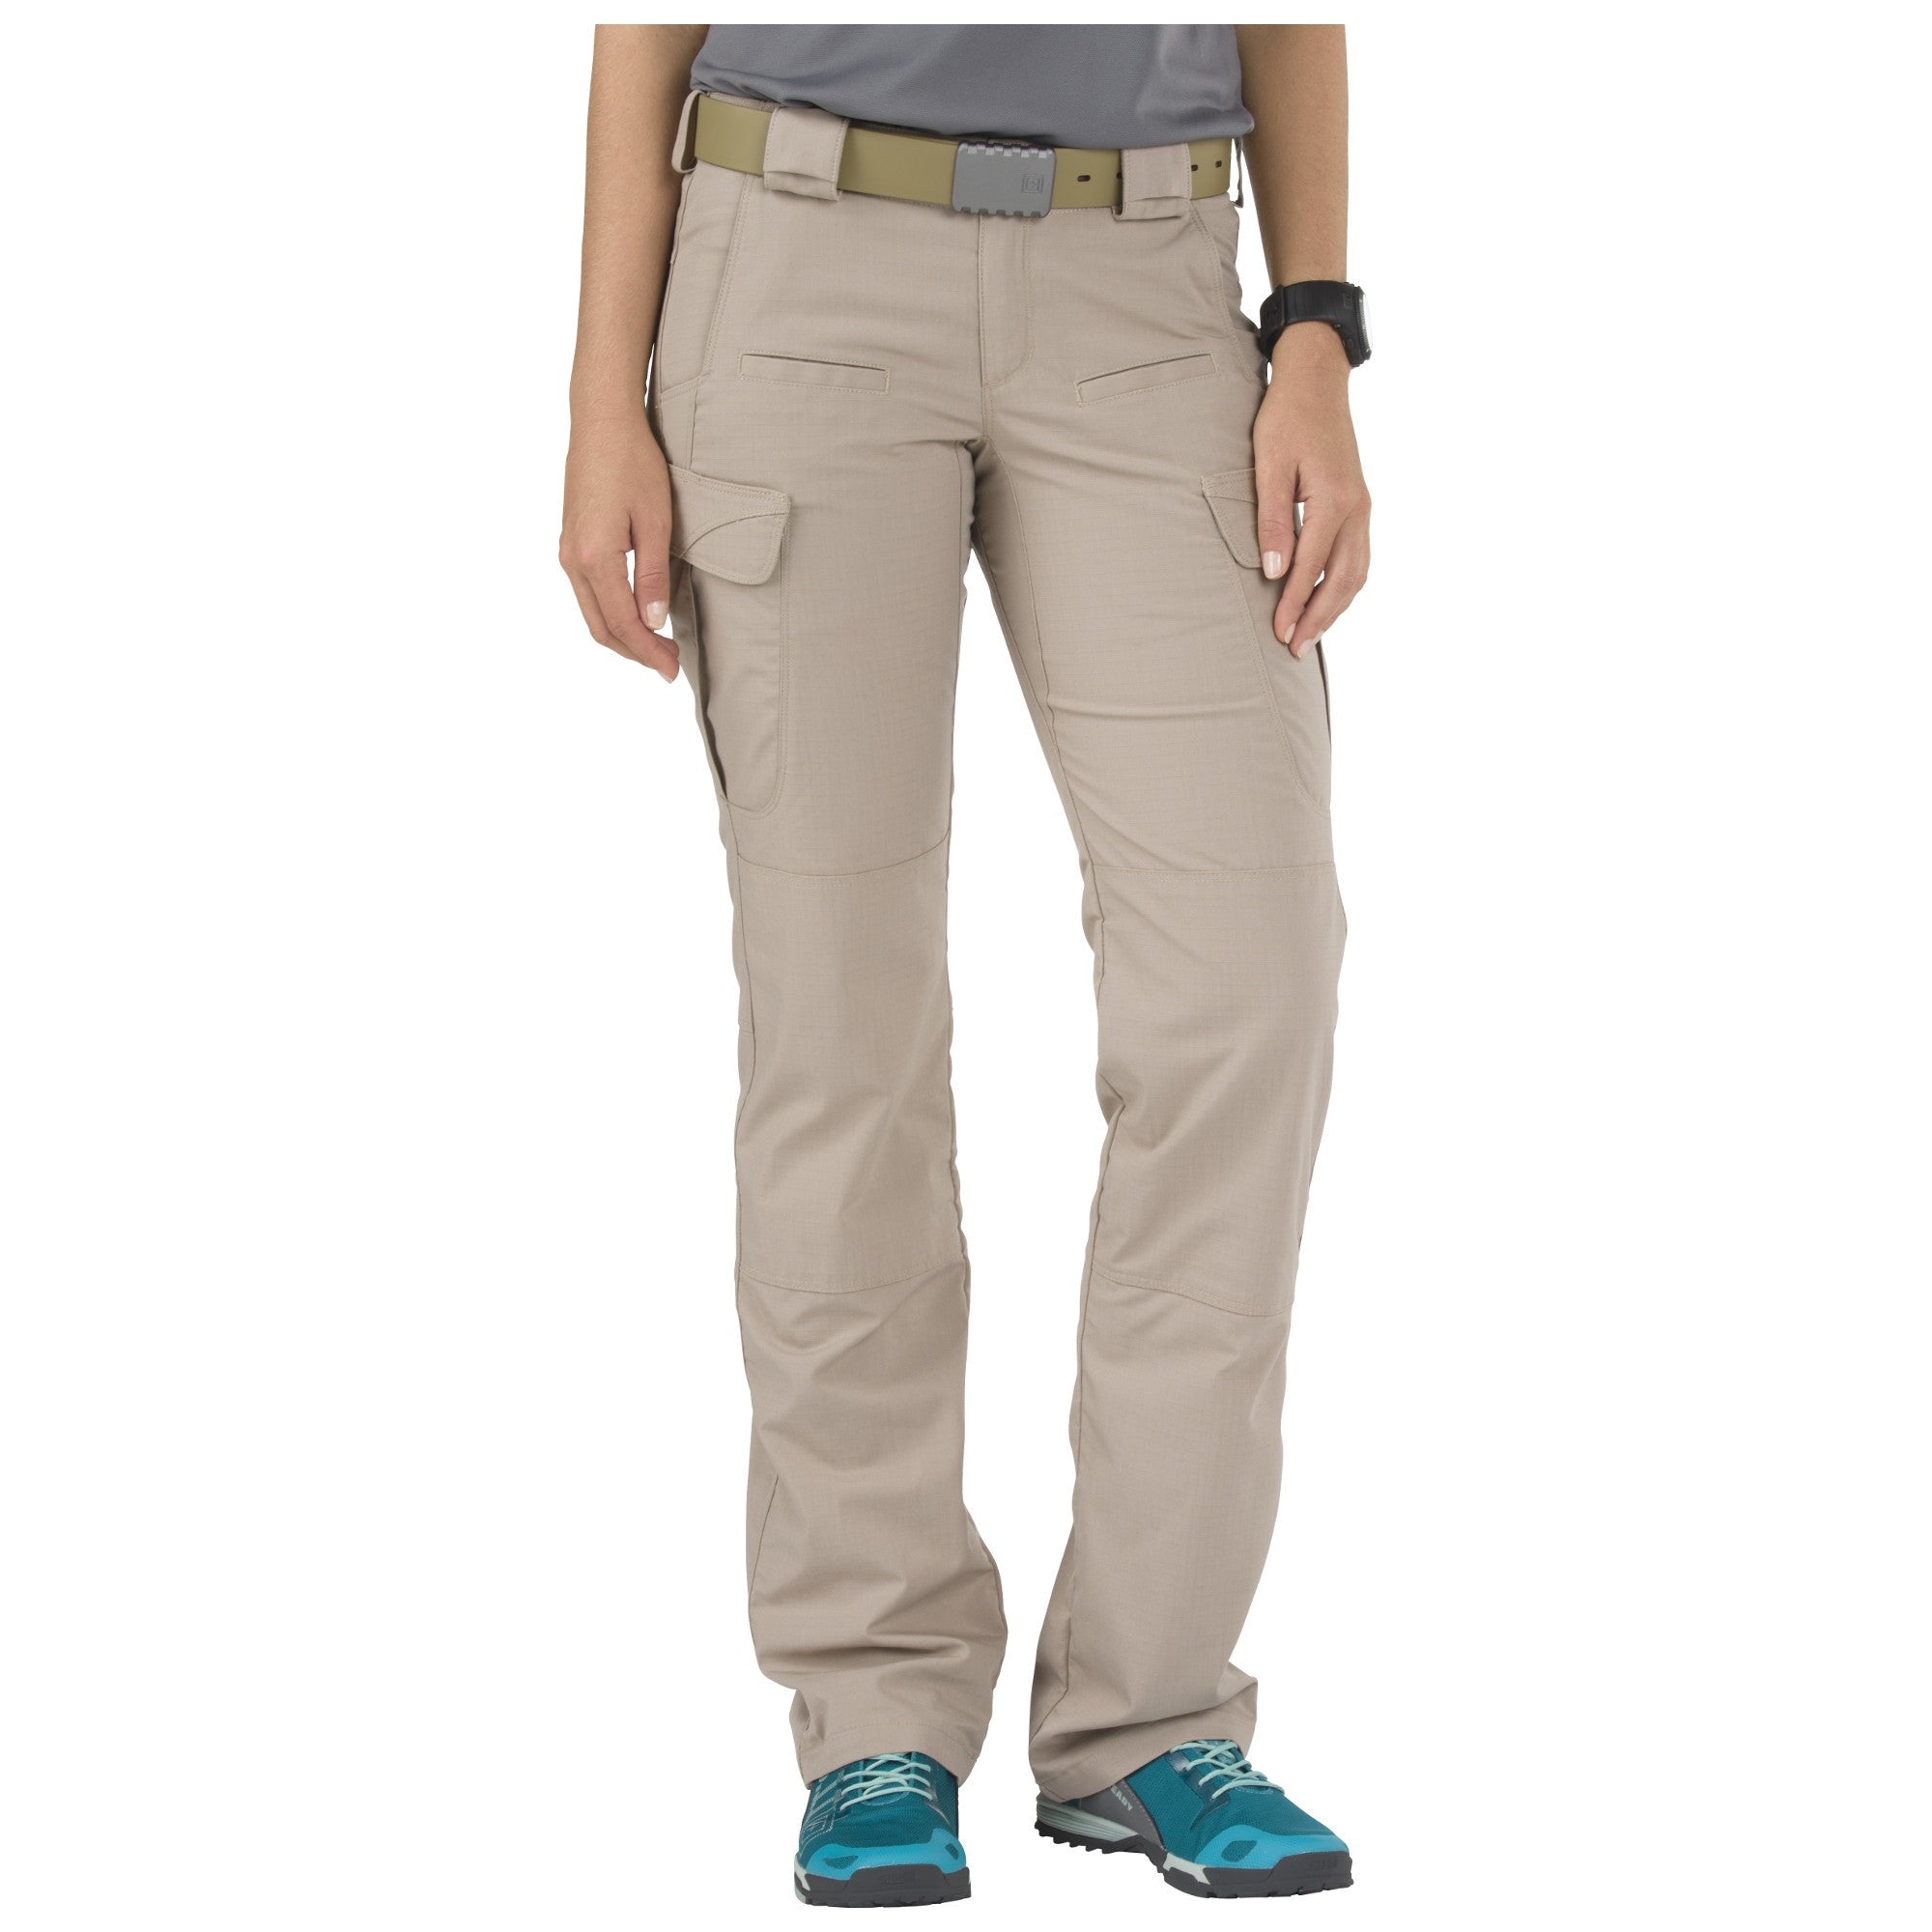 MEN'S 5.11 STRYKE PANTS - FREE HEMMING AND FREE FIRST CLASS TACTICAL BELT